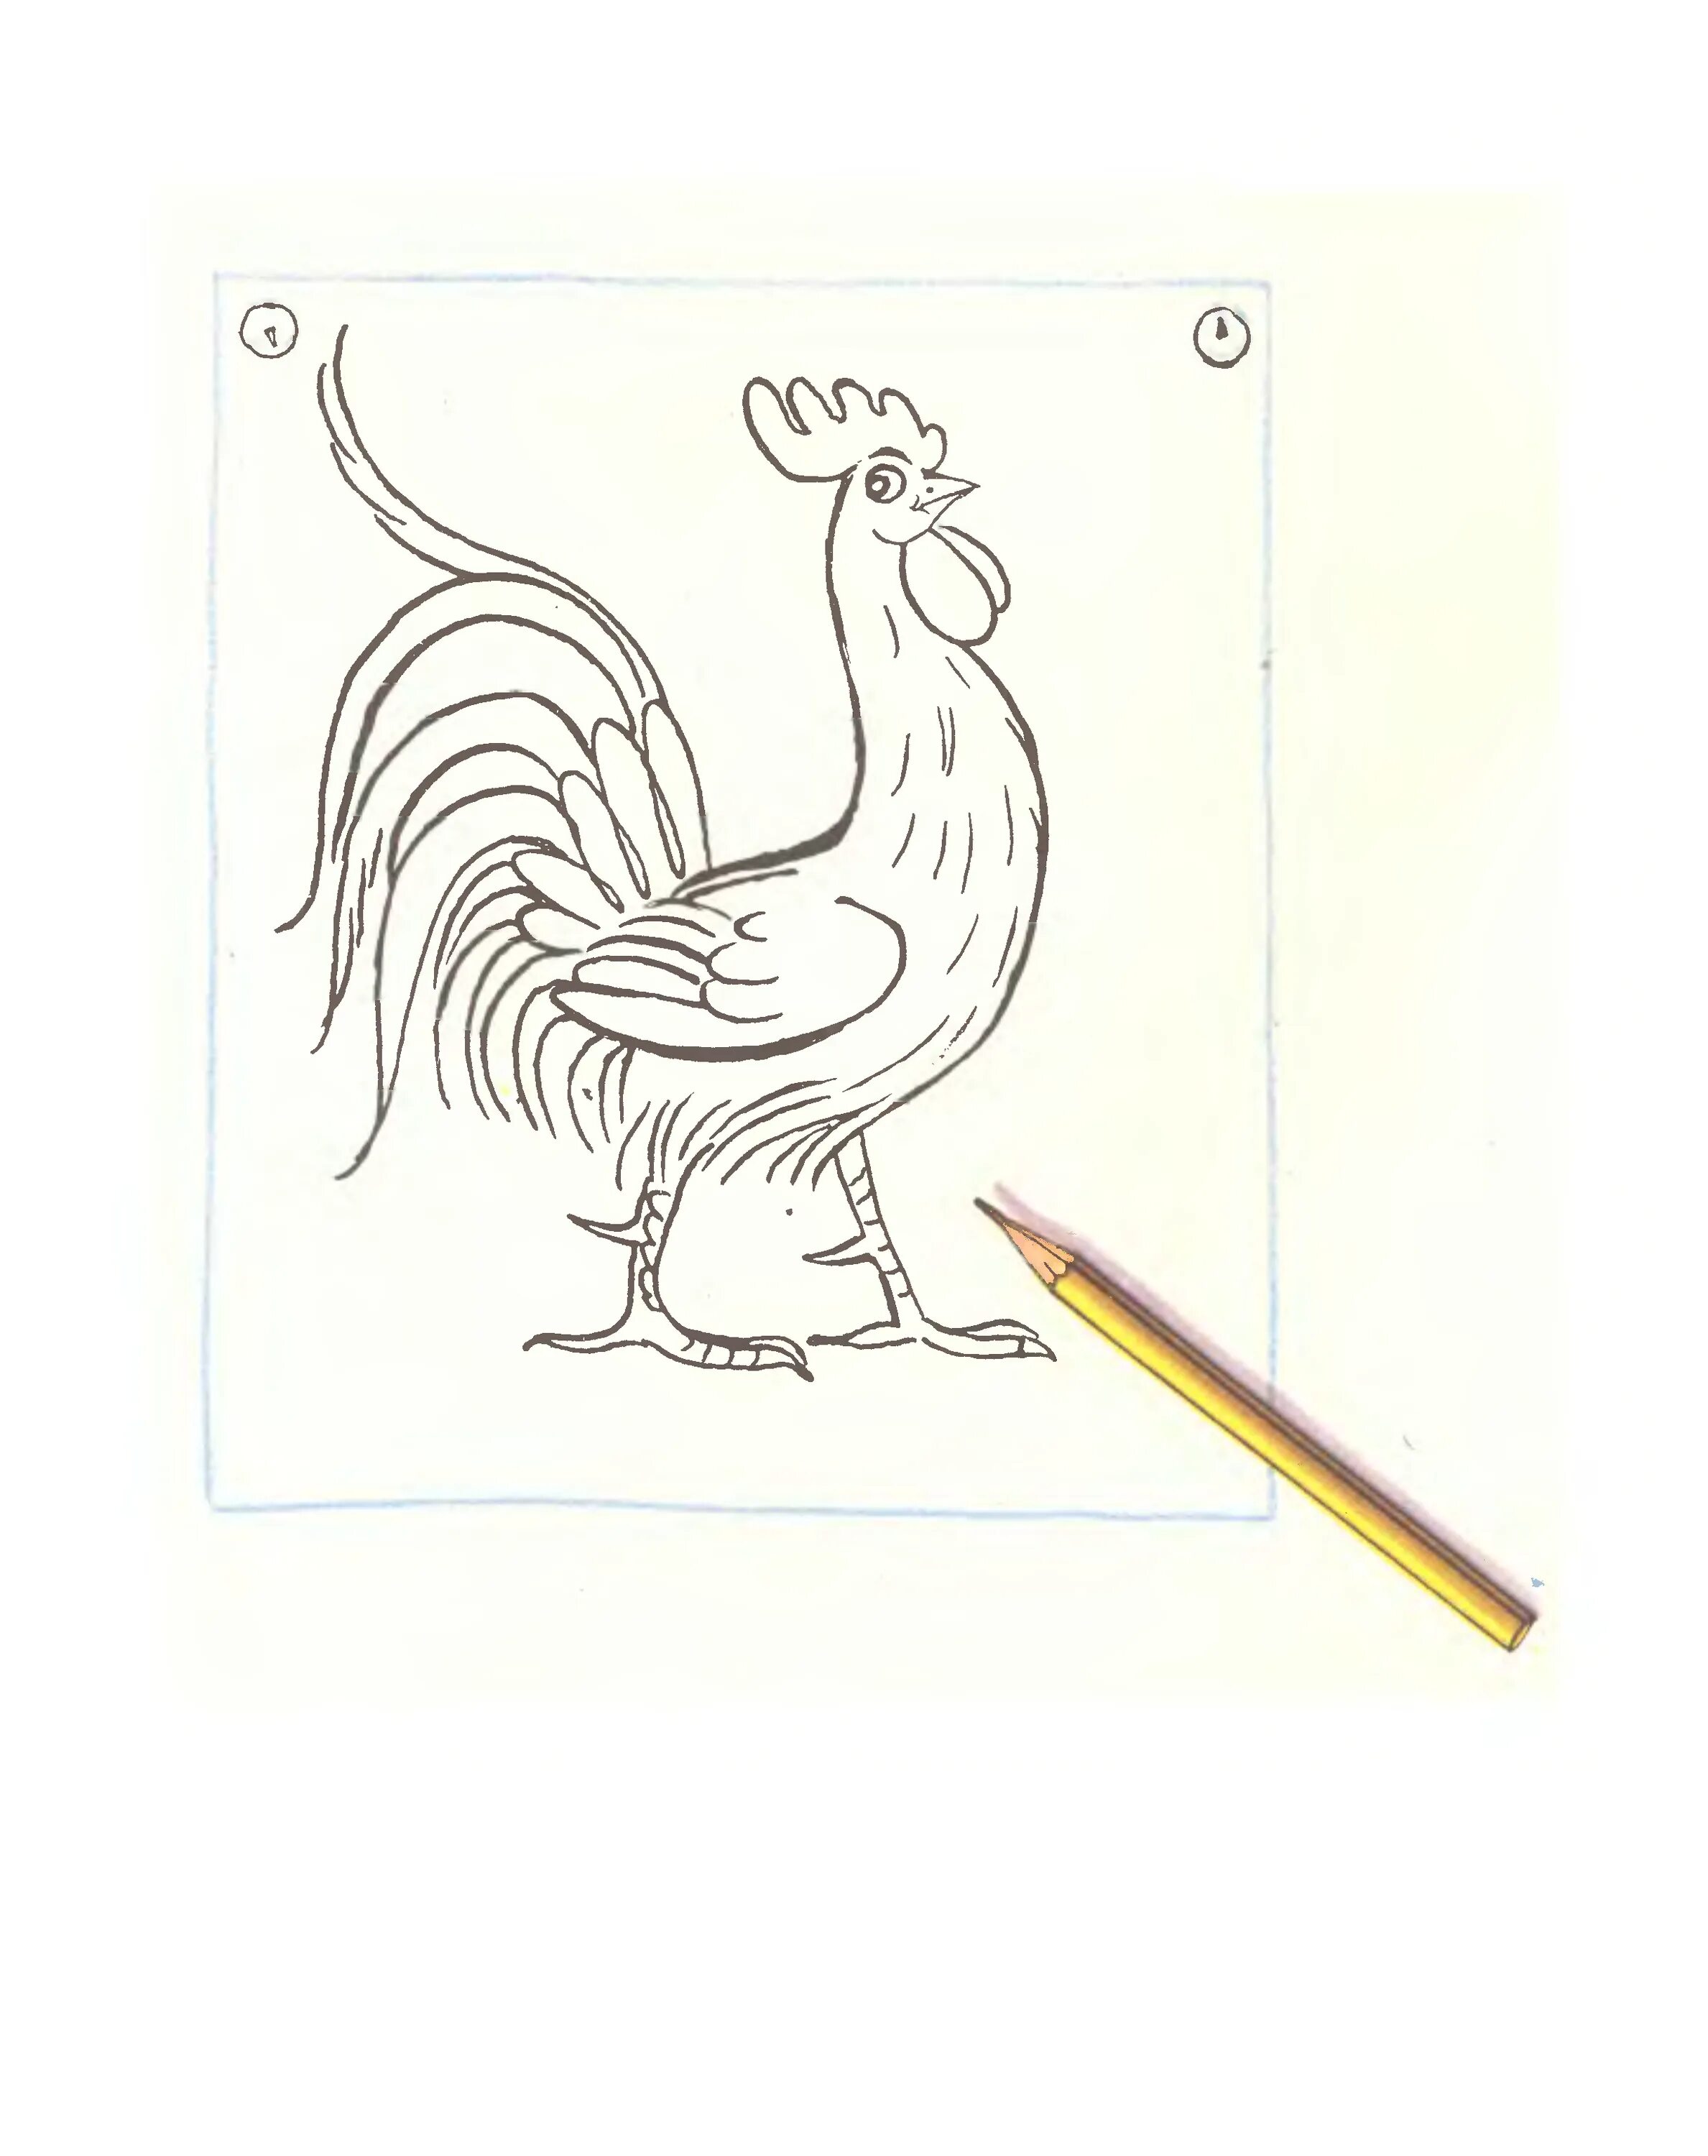 Coloring page of a cheerful rooster